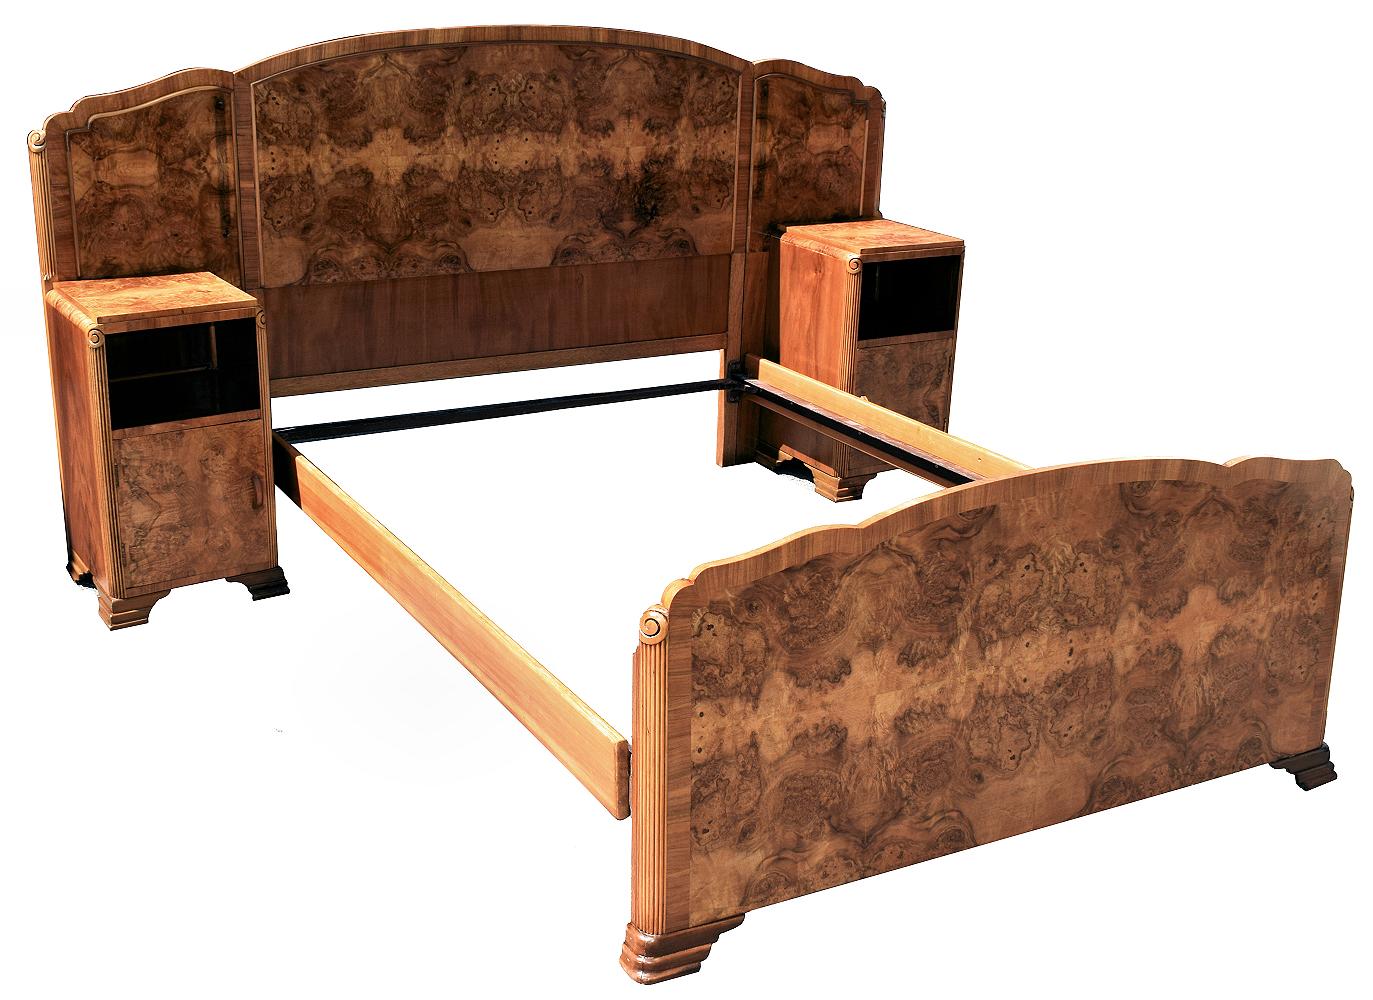 Iron Original 1930s Art Deco Odeon Walnut Double Bed with Integral Cabinets